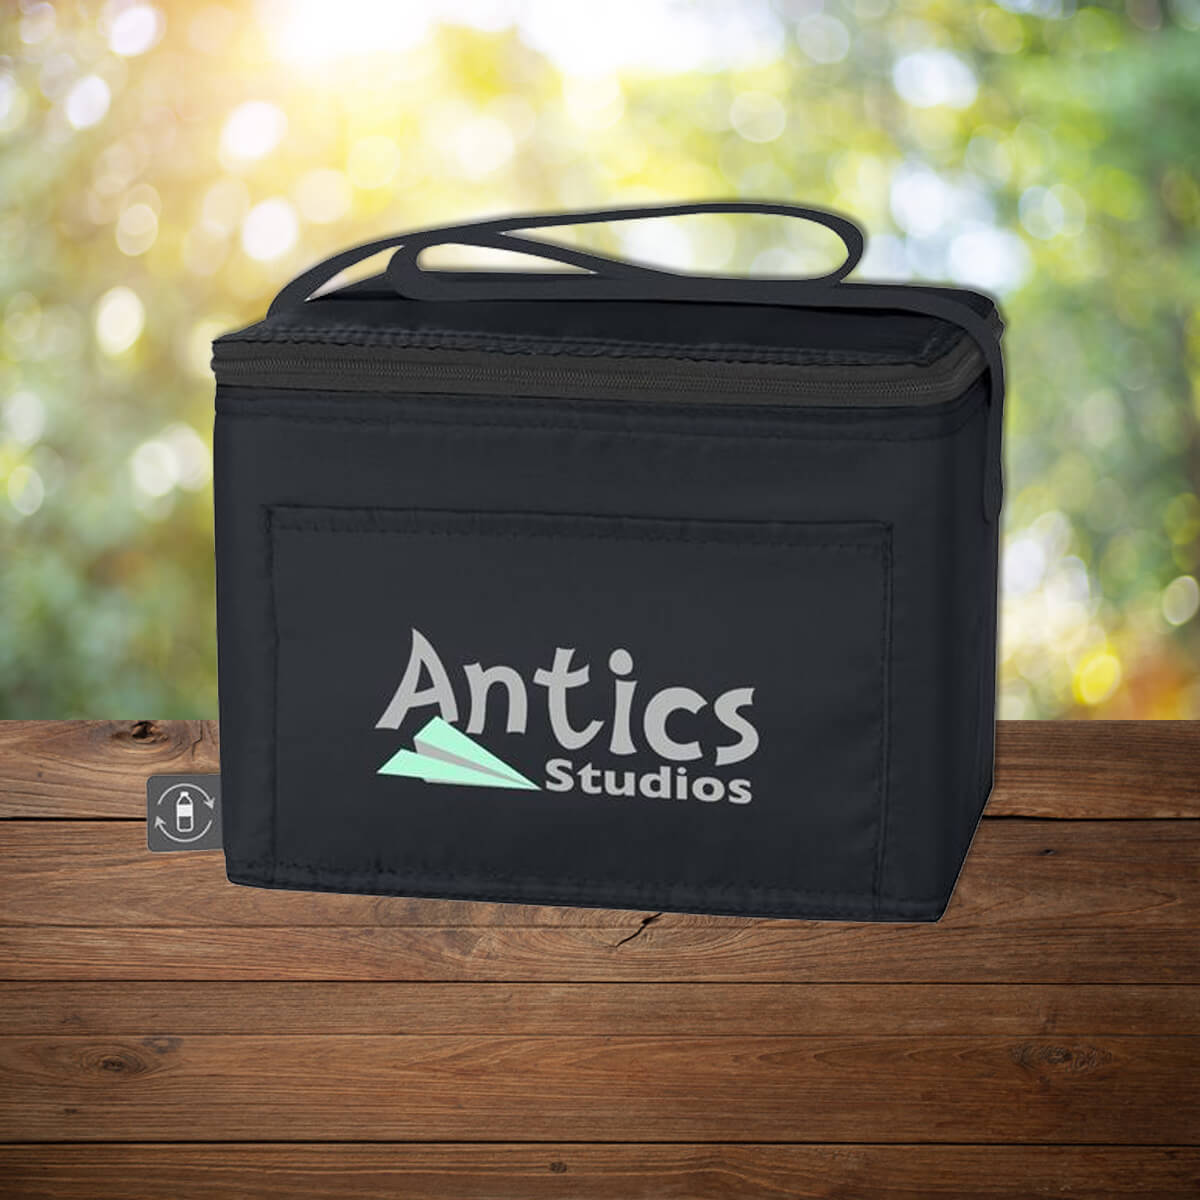 Rectangular black logo'd custom promotional lunch box cooler bags by curative printing